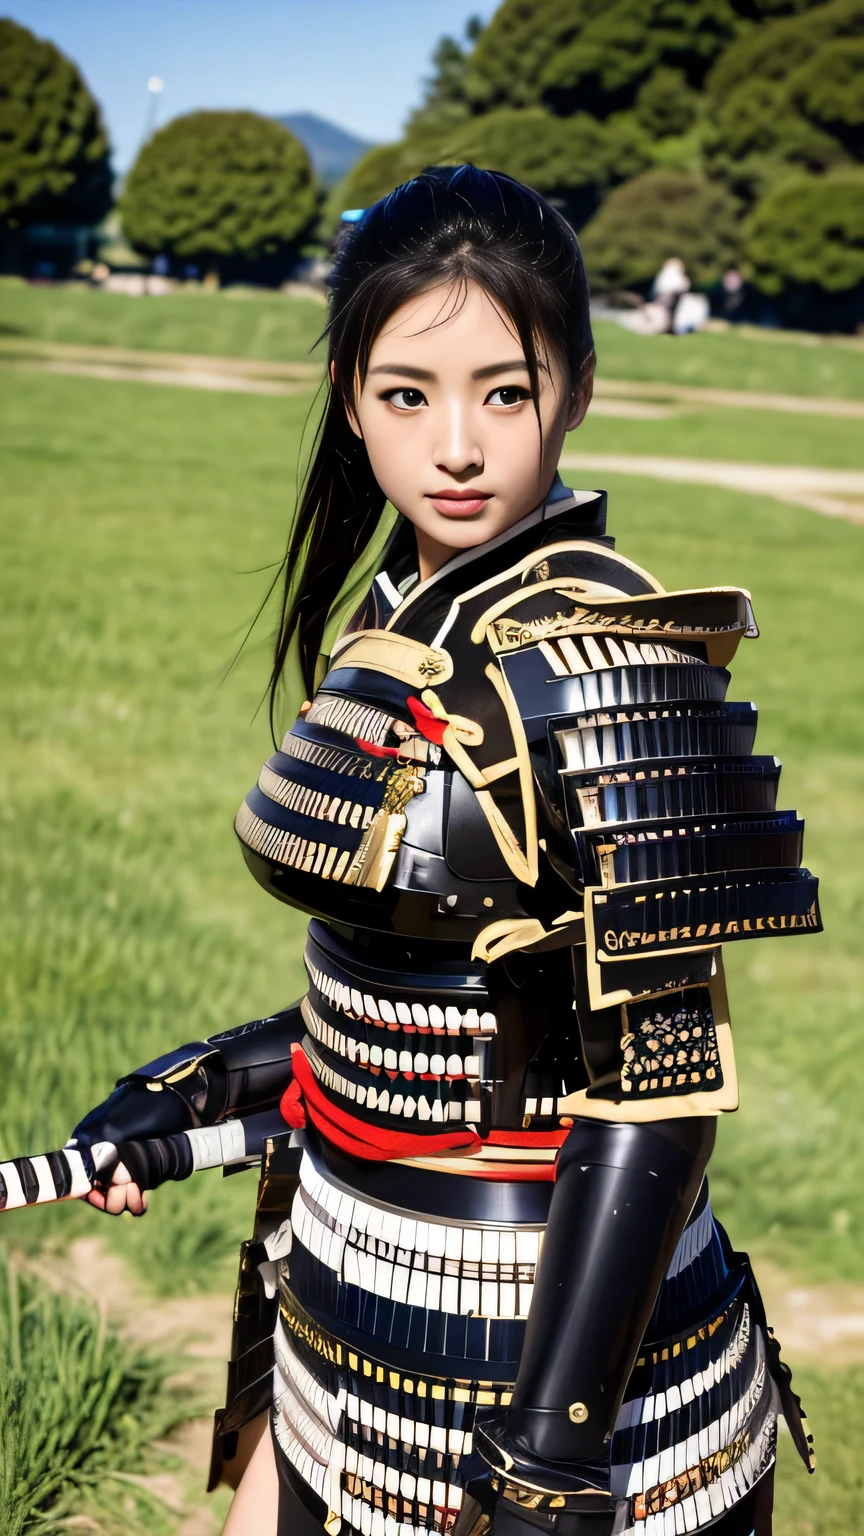 Timeless charm, elegance, photo movie-like ultra-ultra high definition, super real, 8K, ticker, ultra high resolution, masterpiece, (Photo Real Stick: 1.2), sharp focus,
1girl, cowboy shot, female warlord from the Sengoku period, accurate anatomy, pose during battle, severe expression, (highly detailed skin and facial texture: 1.2), (Samurai Armor: 1.3), (sharp Japanese sword) female samurai with: 1.3), (battle: 1.2), beautiful and aesthetic, cute beauty, (perfect style: 1.2), fair skin, very beautiful face, black eyes, long black hair in a ponytail, messy hair, beautiful Face, exquisite face, perfect proportions, drop-shaped breasts, plump breasts, thick thighs, (beautiful brown eyes, ), (dynamic pose, change pose, dynamic angle,), taiga, horde of reeds, riverbed, Japanese wilderness, (wide angle of view: 1.5),